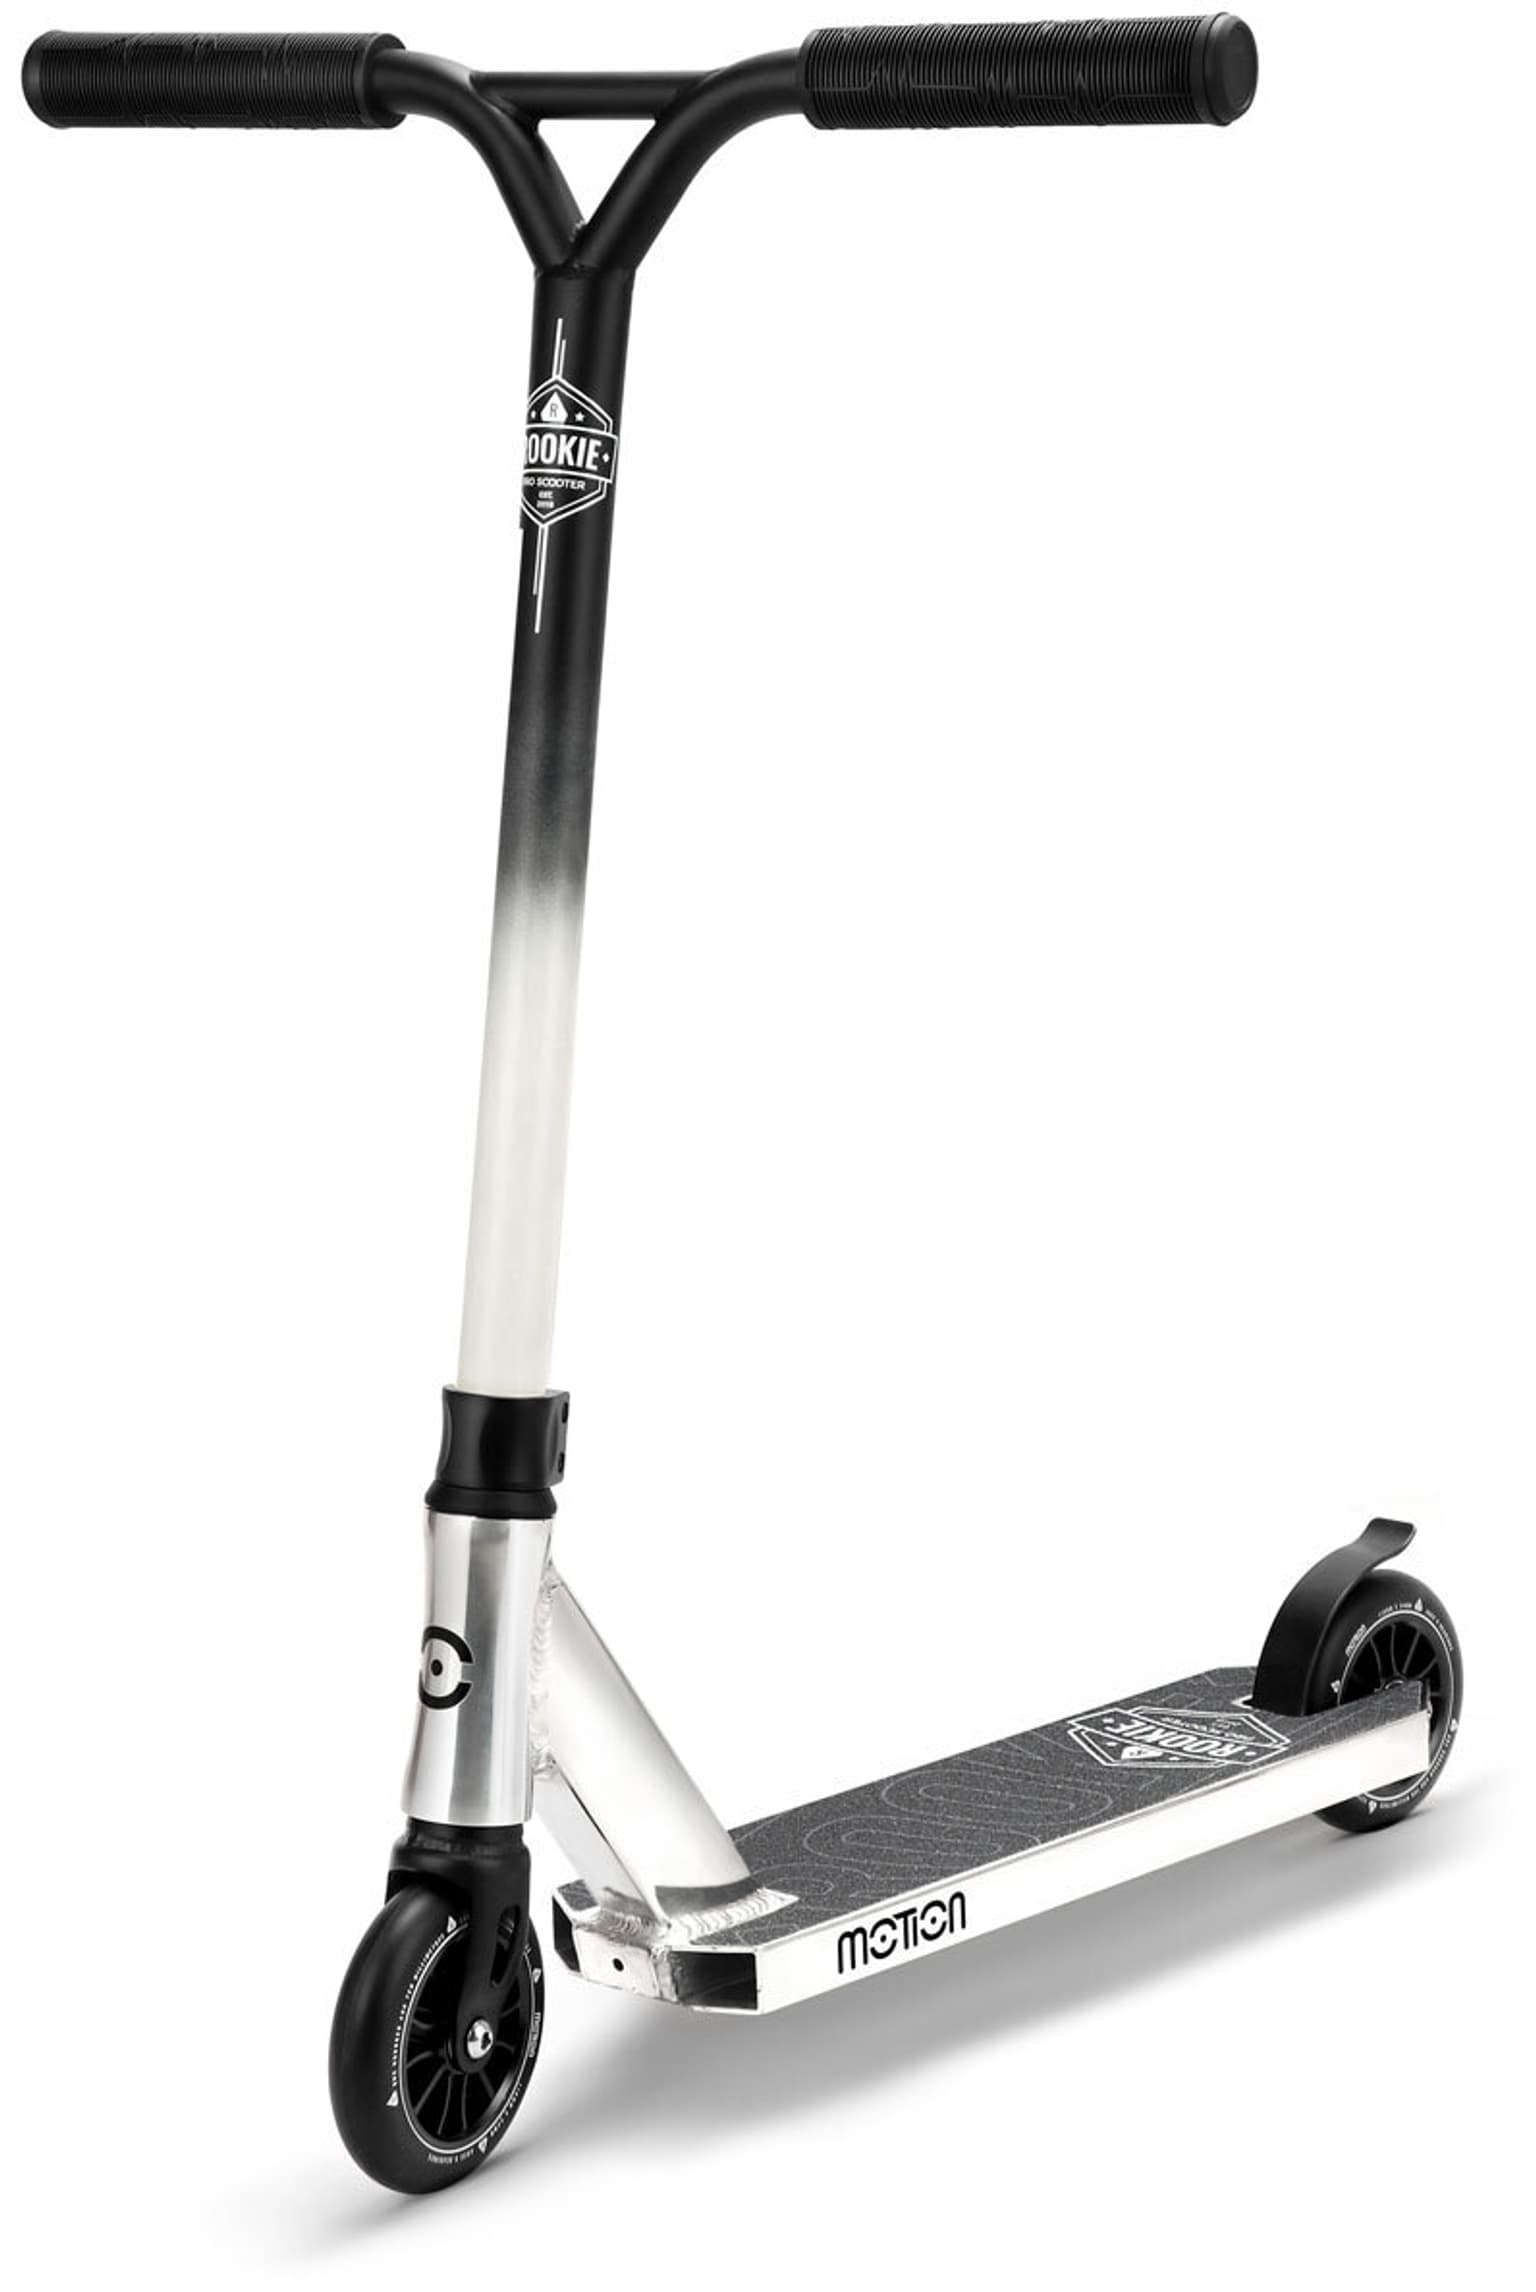 Motion Motion Rookie Pro Scooter 1